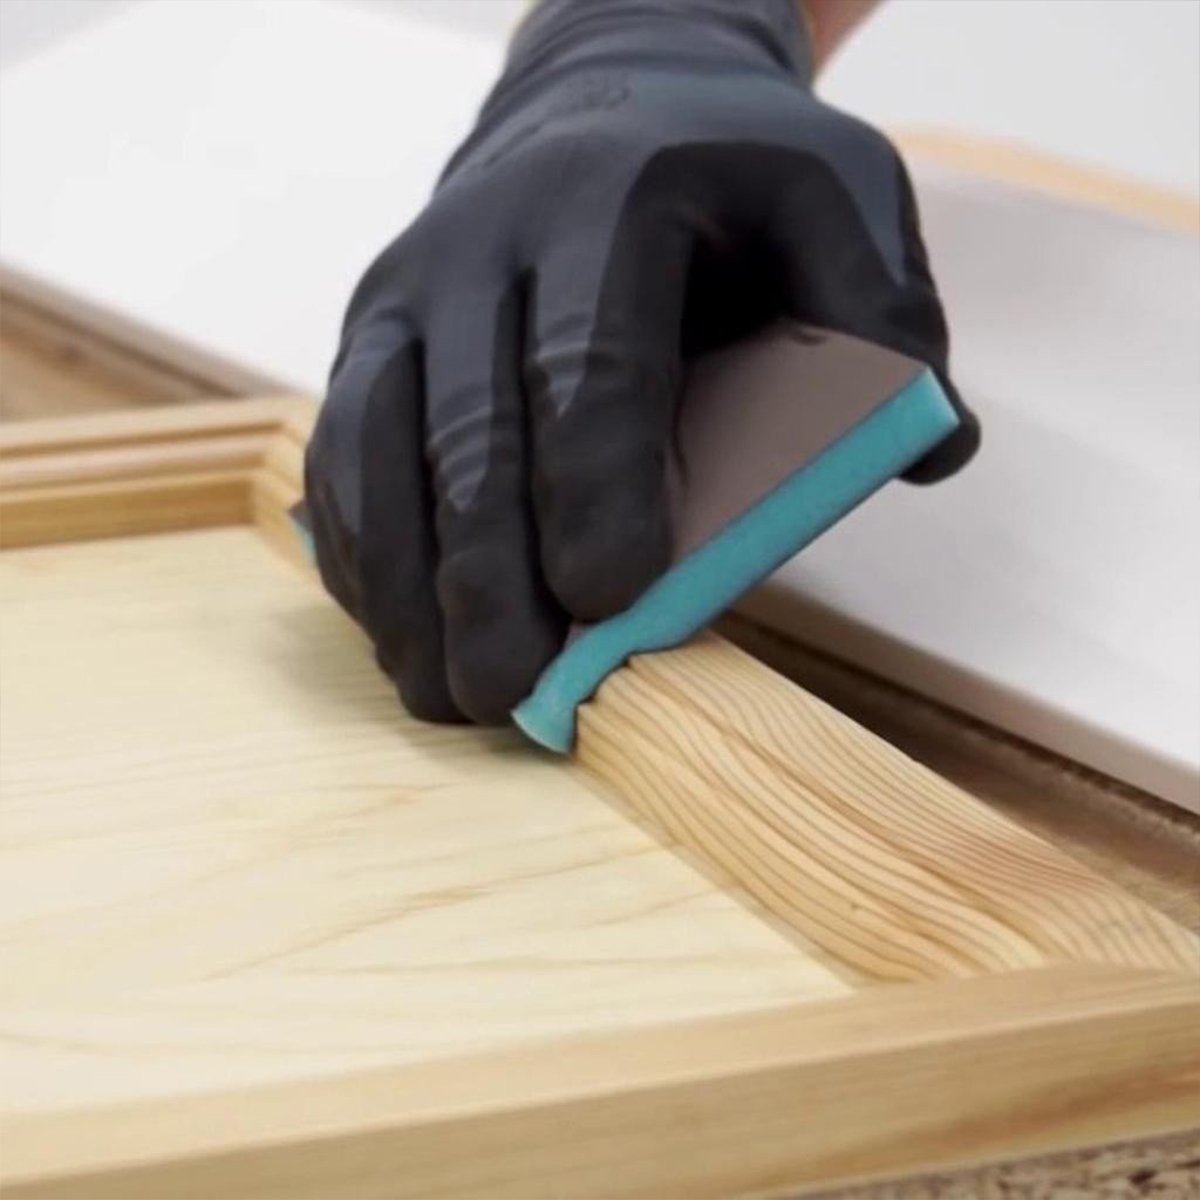 A gloved hand uses an abrasive sponge to sand a routed classical moulding profile.